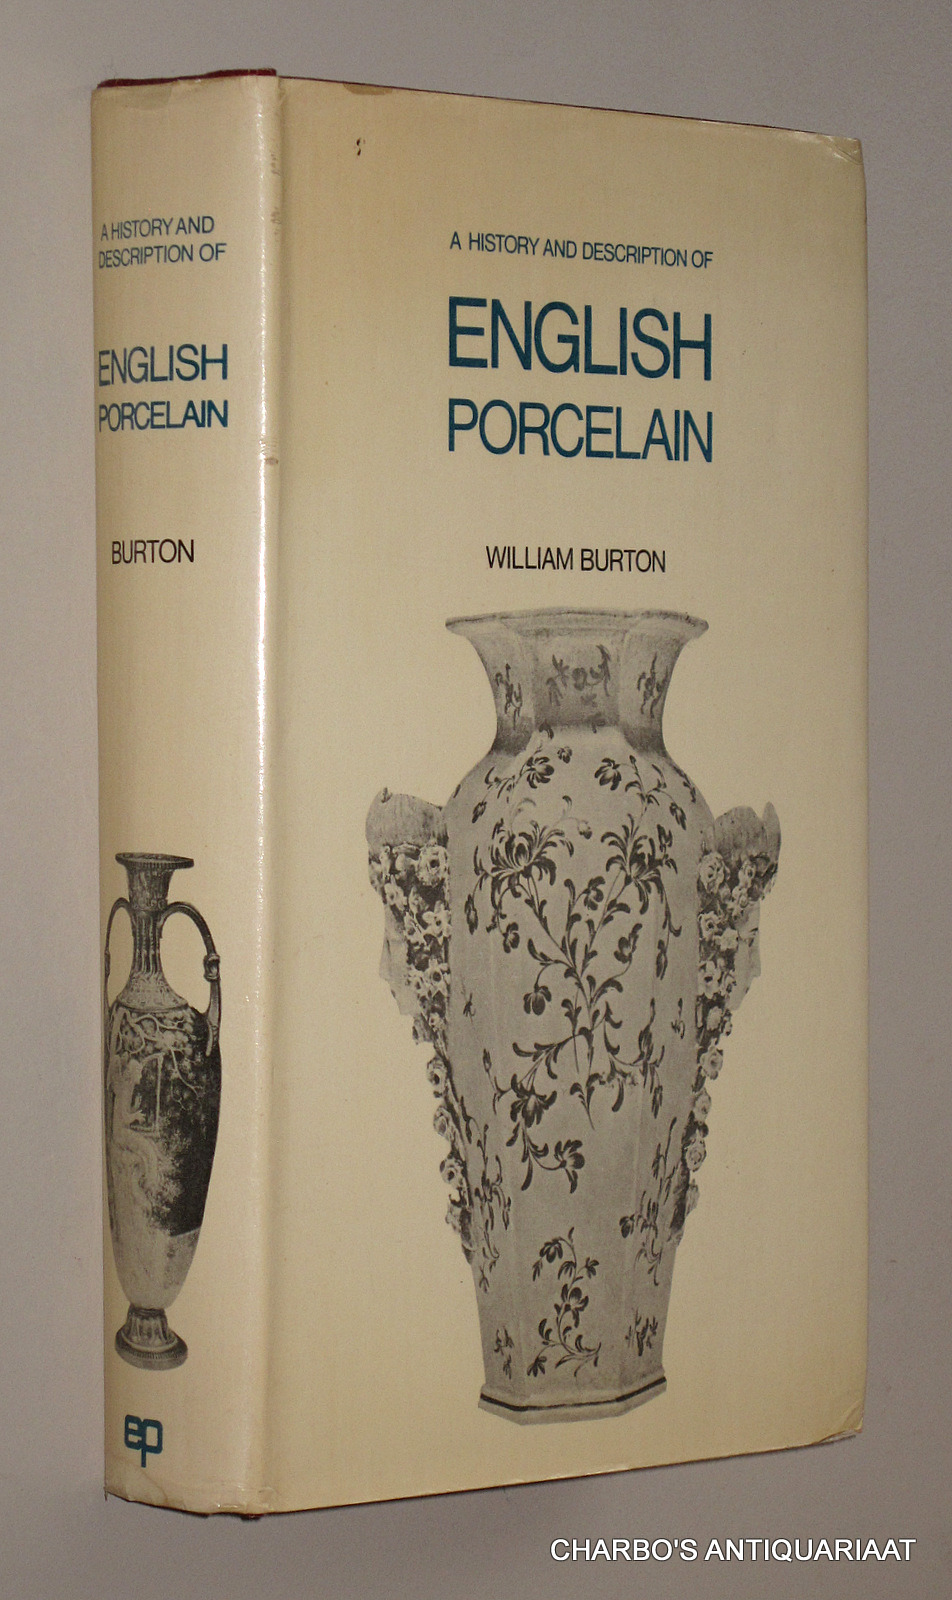 BURTON, WILLIAM, -  A history and description of English porcelain. With a new introduction.